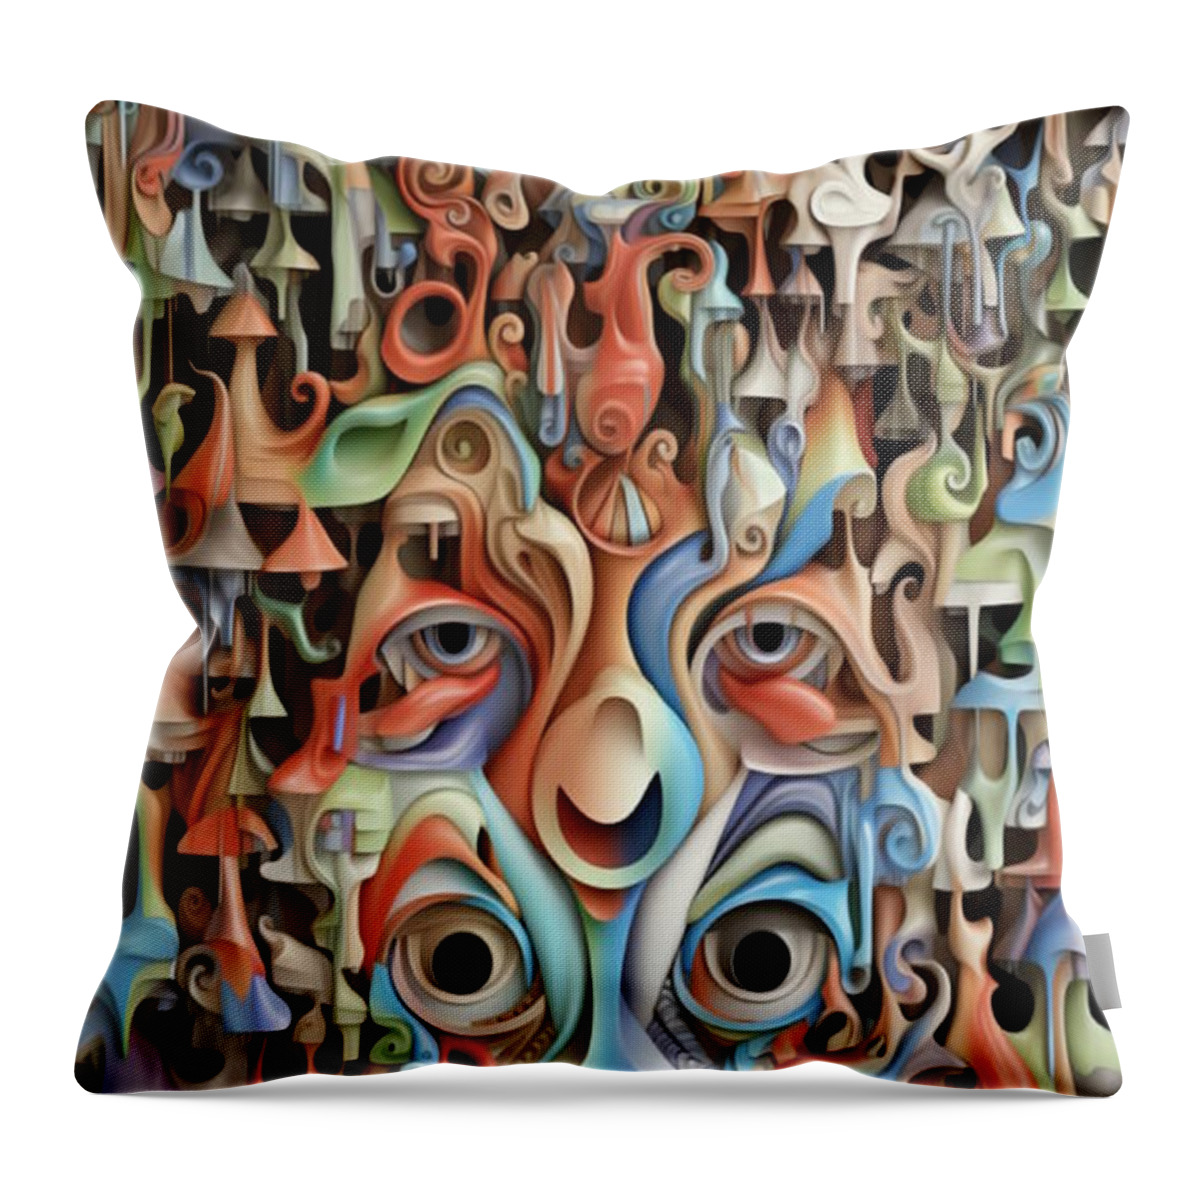  Throw Pillow featuring the digital art Case No 10 by Mark Slauter